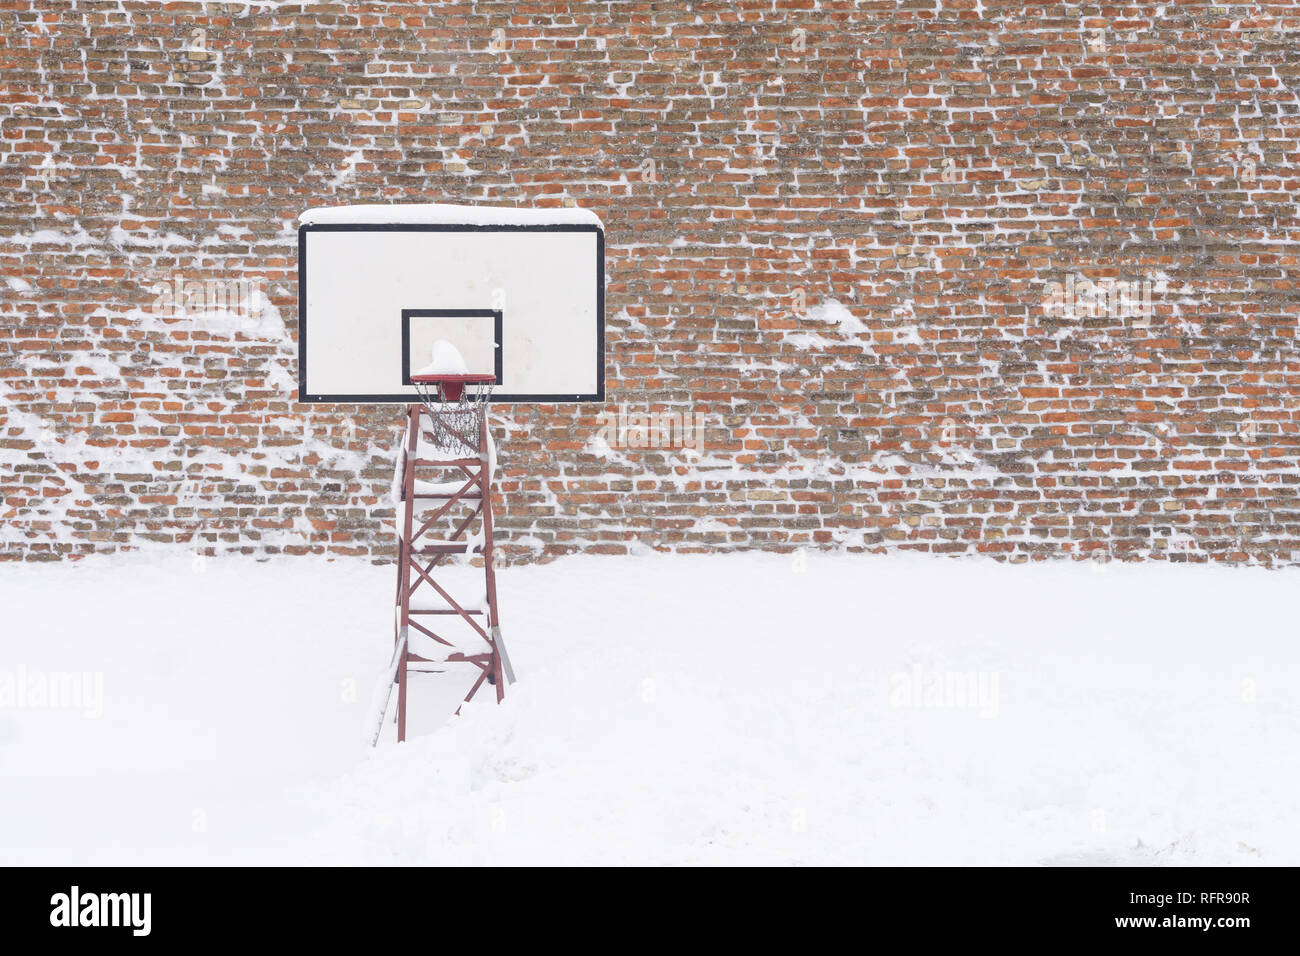 Basketball hoop in the winter, covered with snow. Stock Photo